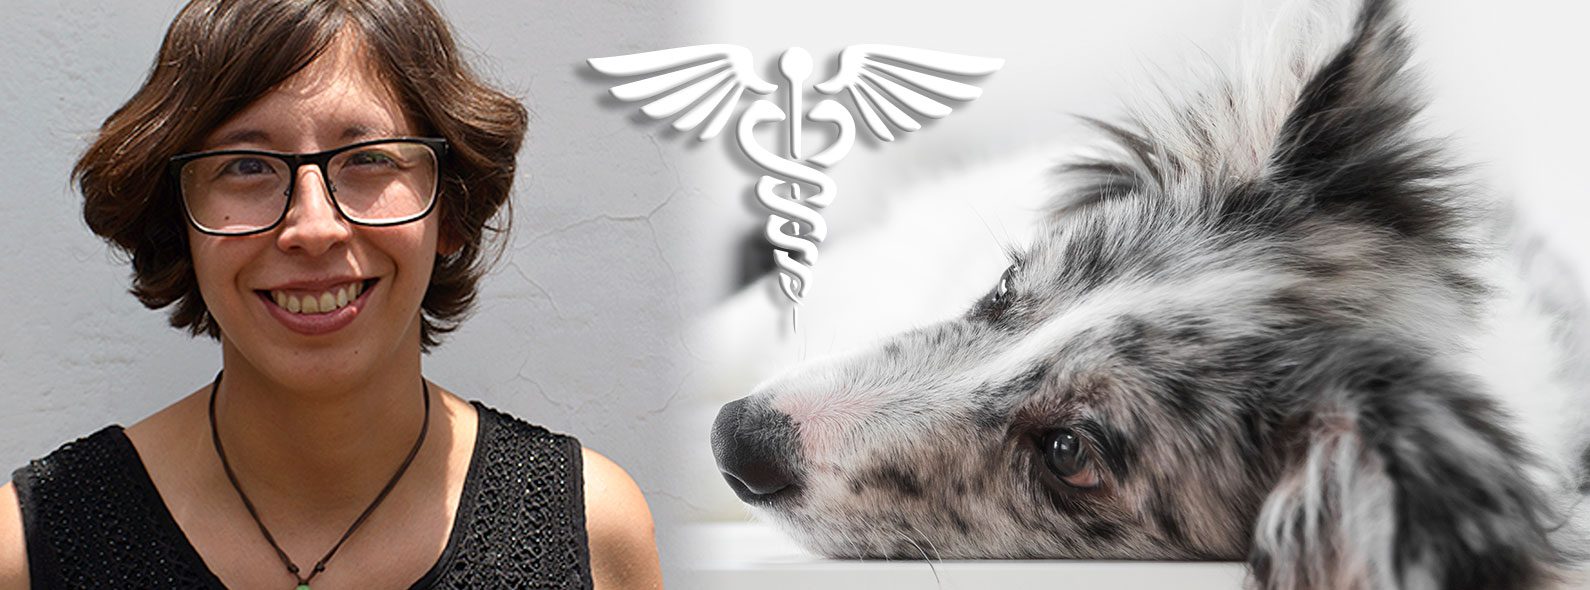 &#8220;There are few veterinarians who work with cannabis&#8221;, interview with Francisca Medina